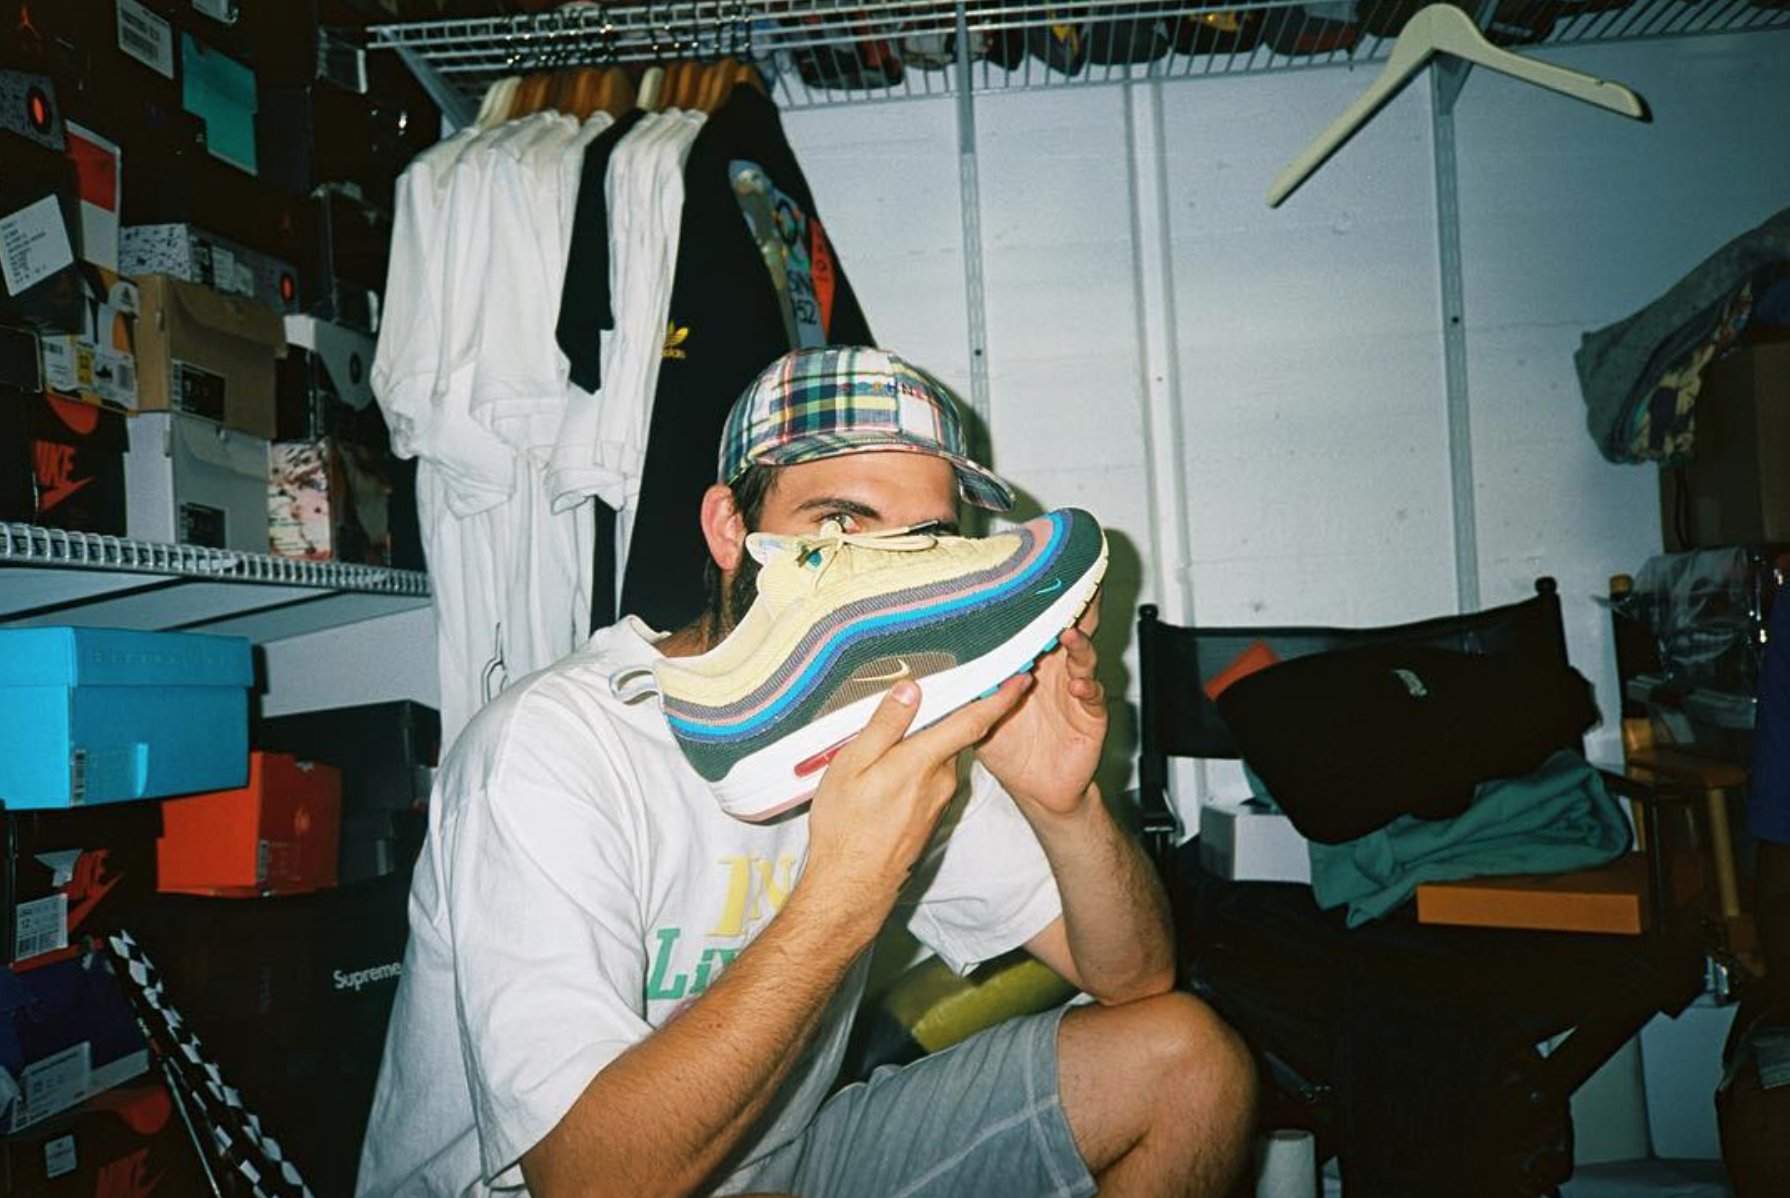 ayudar Oxidar Lectura cuidadosa Sean Wotherspoon Fires Shots at StockX Over Fake Shoes - WearTesters